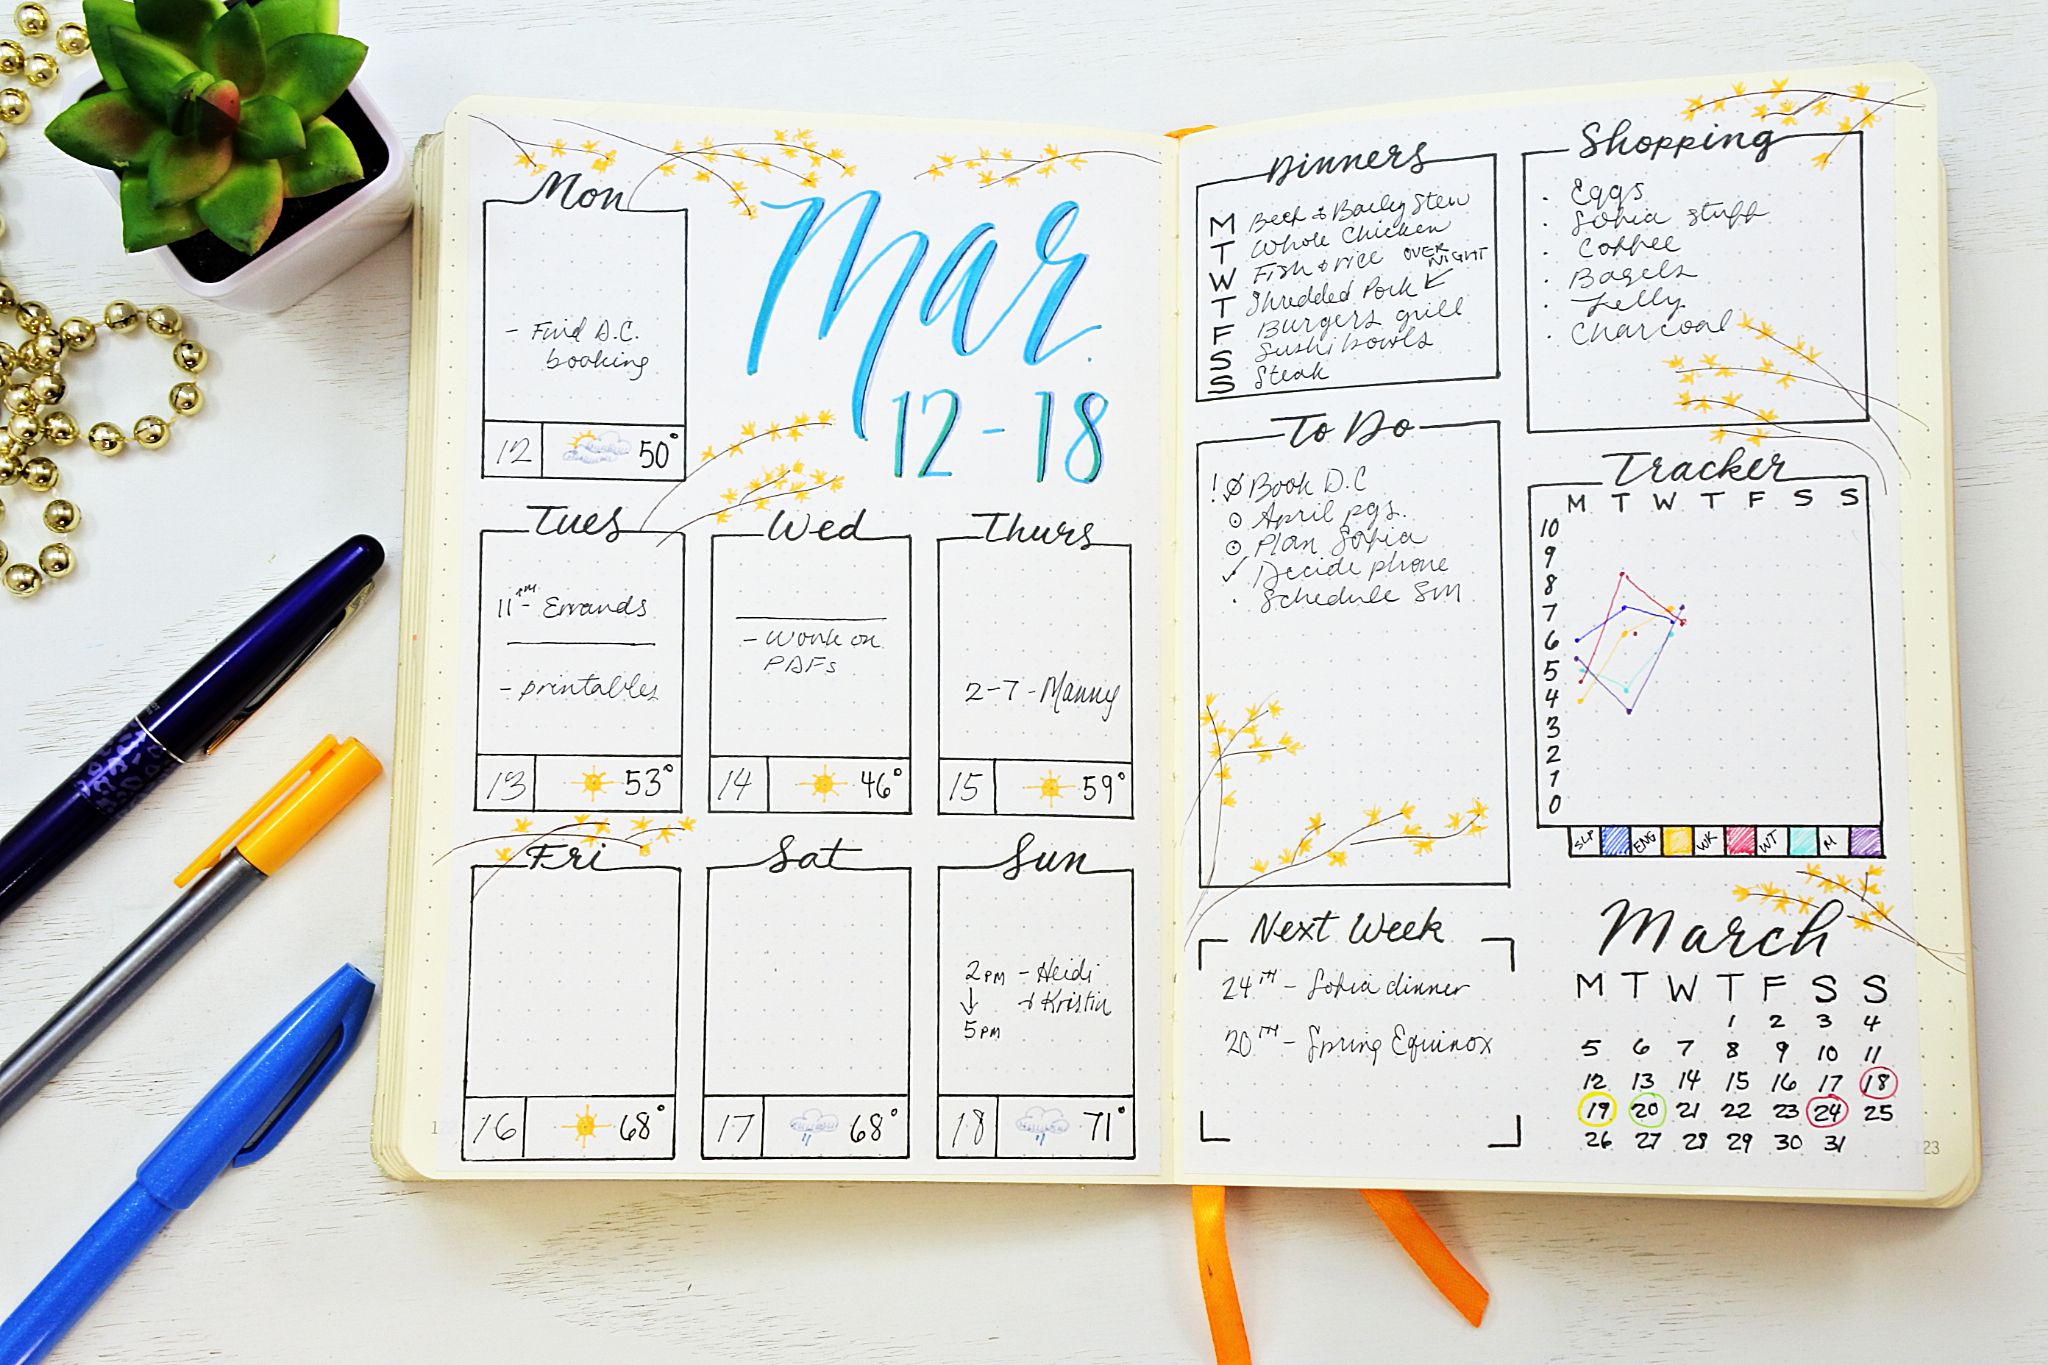 Super Over 20 Easy Bullet Journal Weekly Spread Ideas! MM-69